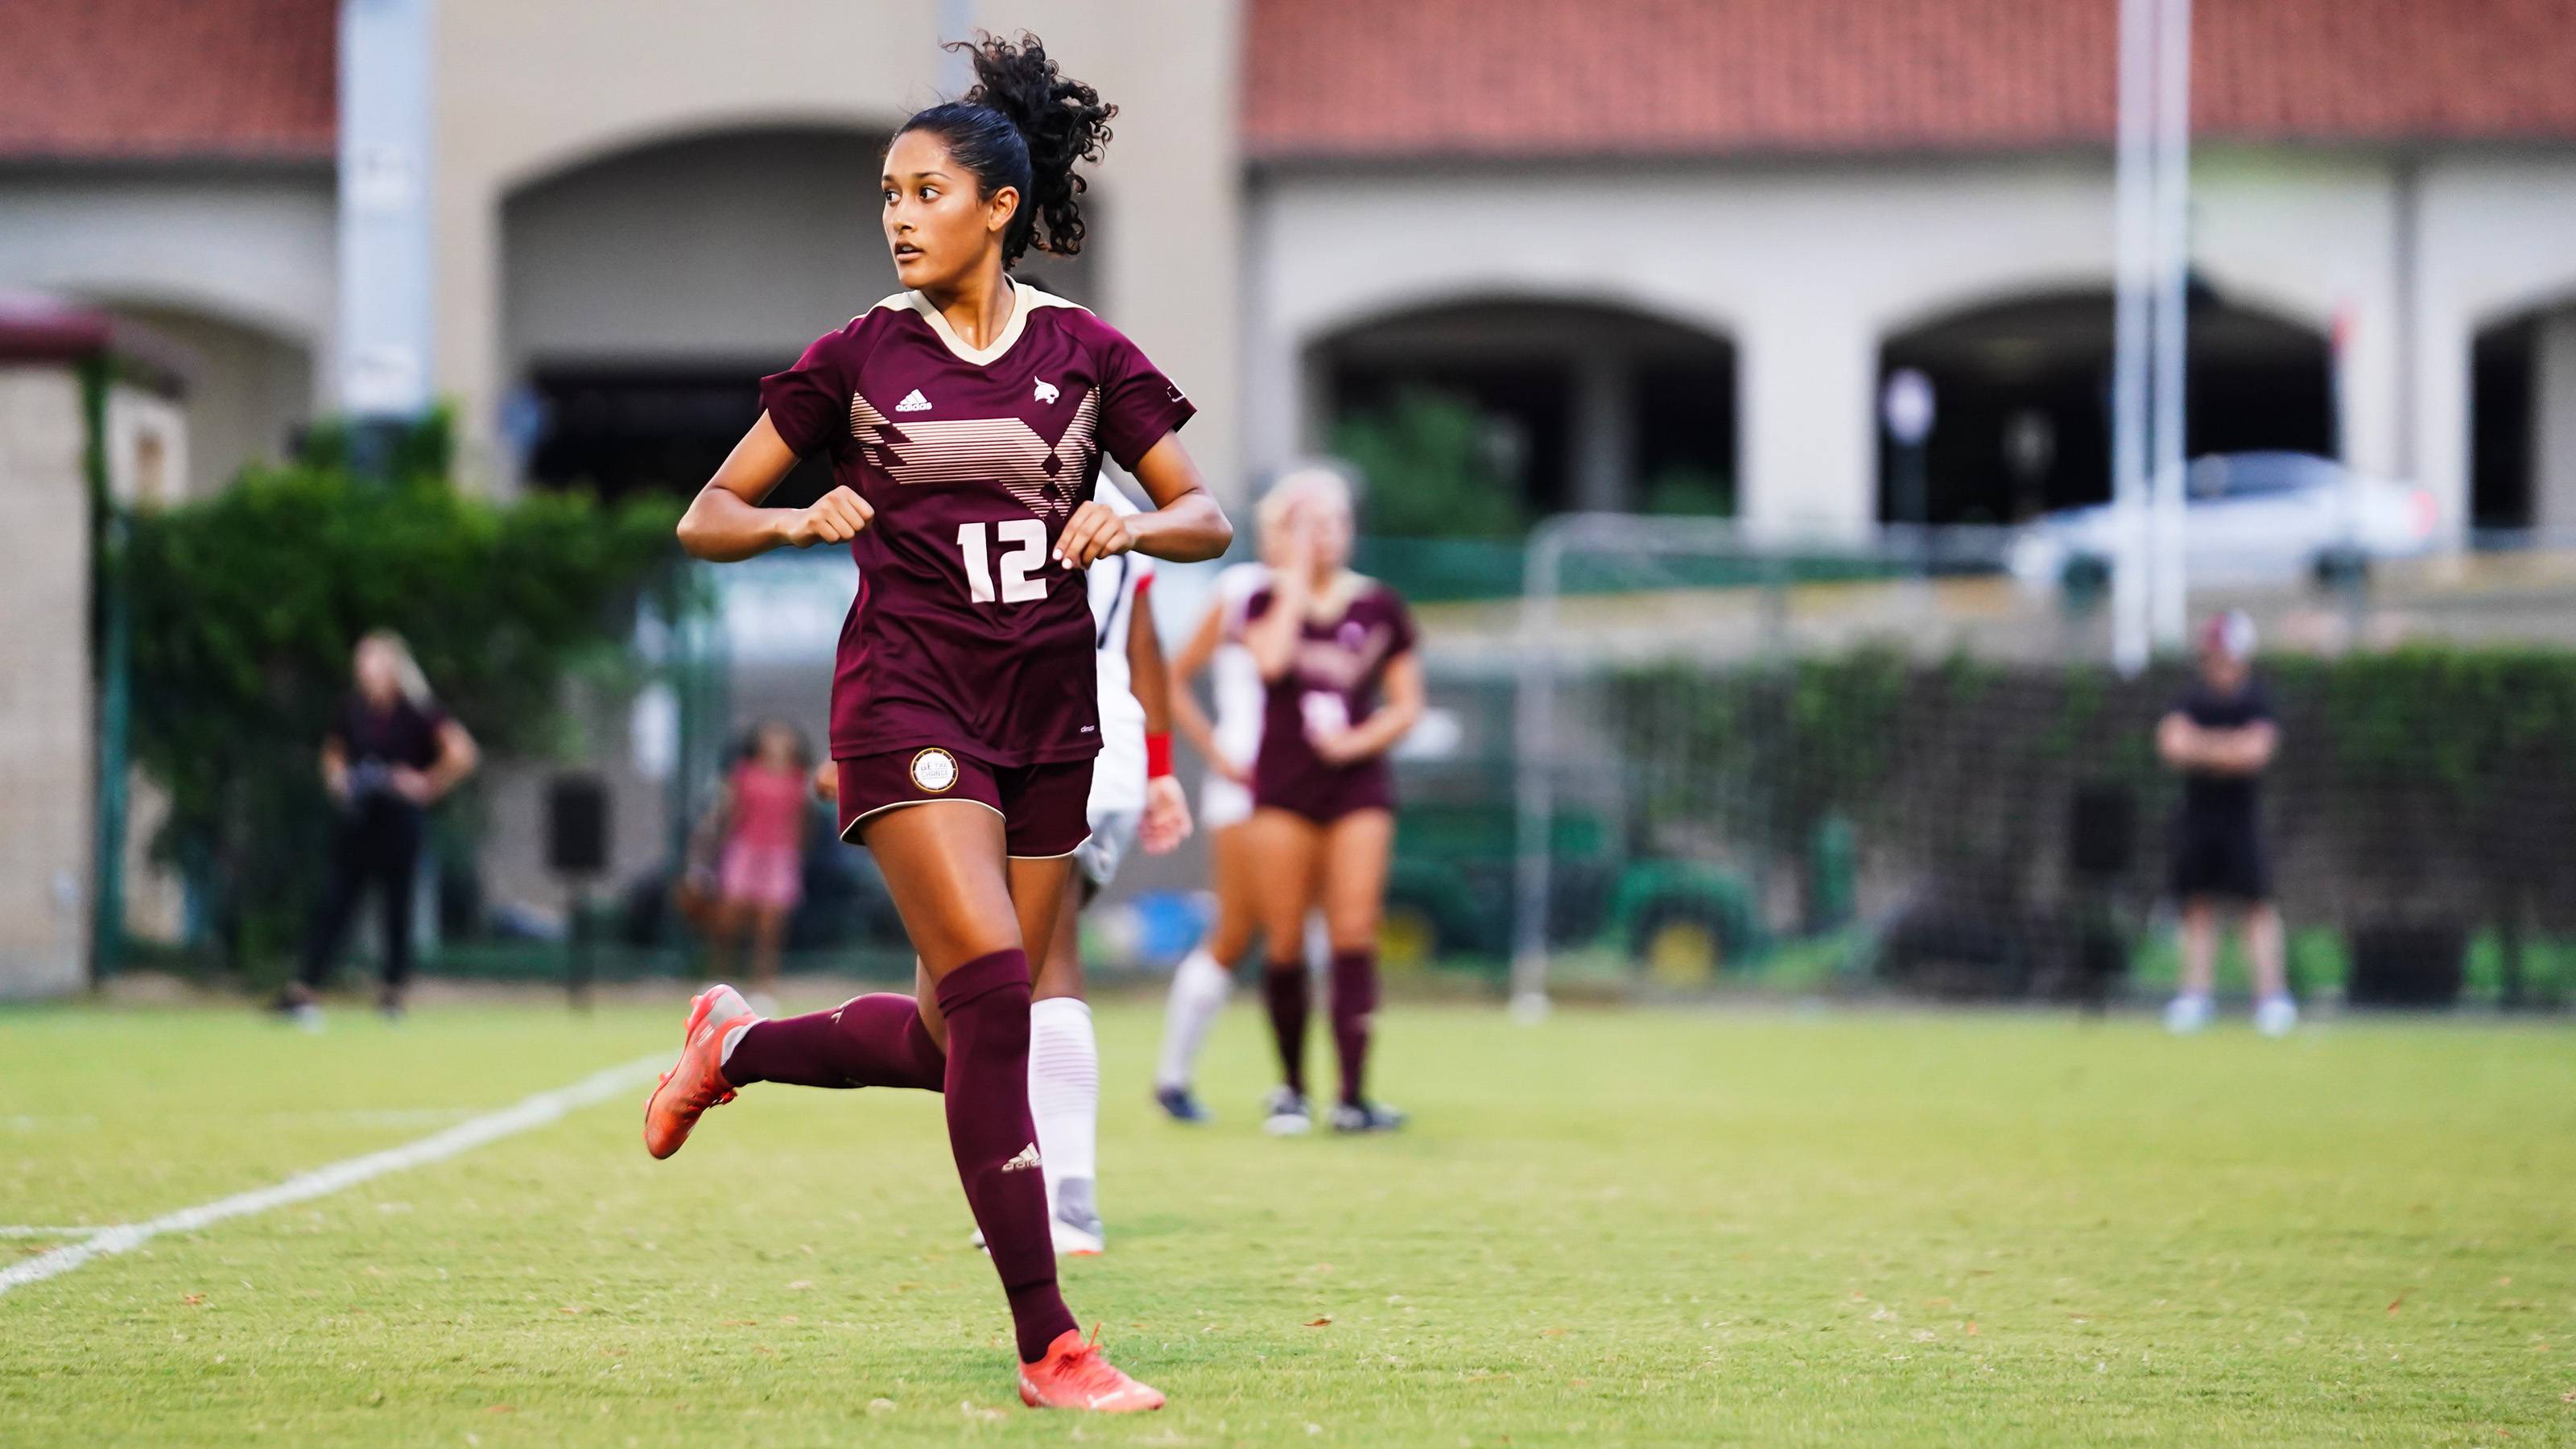 Juana Plata running on soccer pitch and looking back wearing maroon Texas State soccer uniform